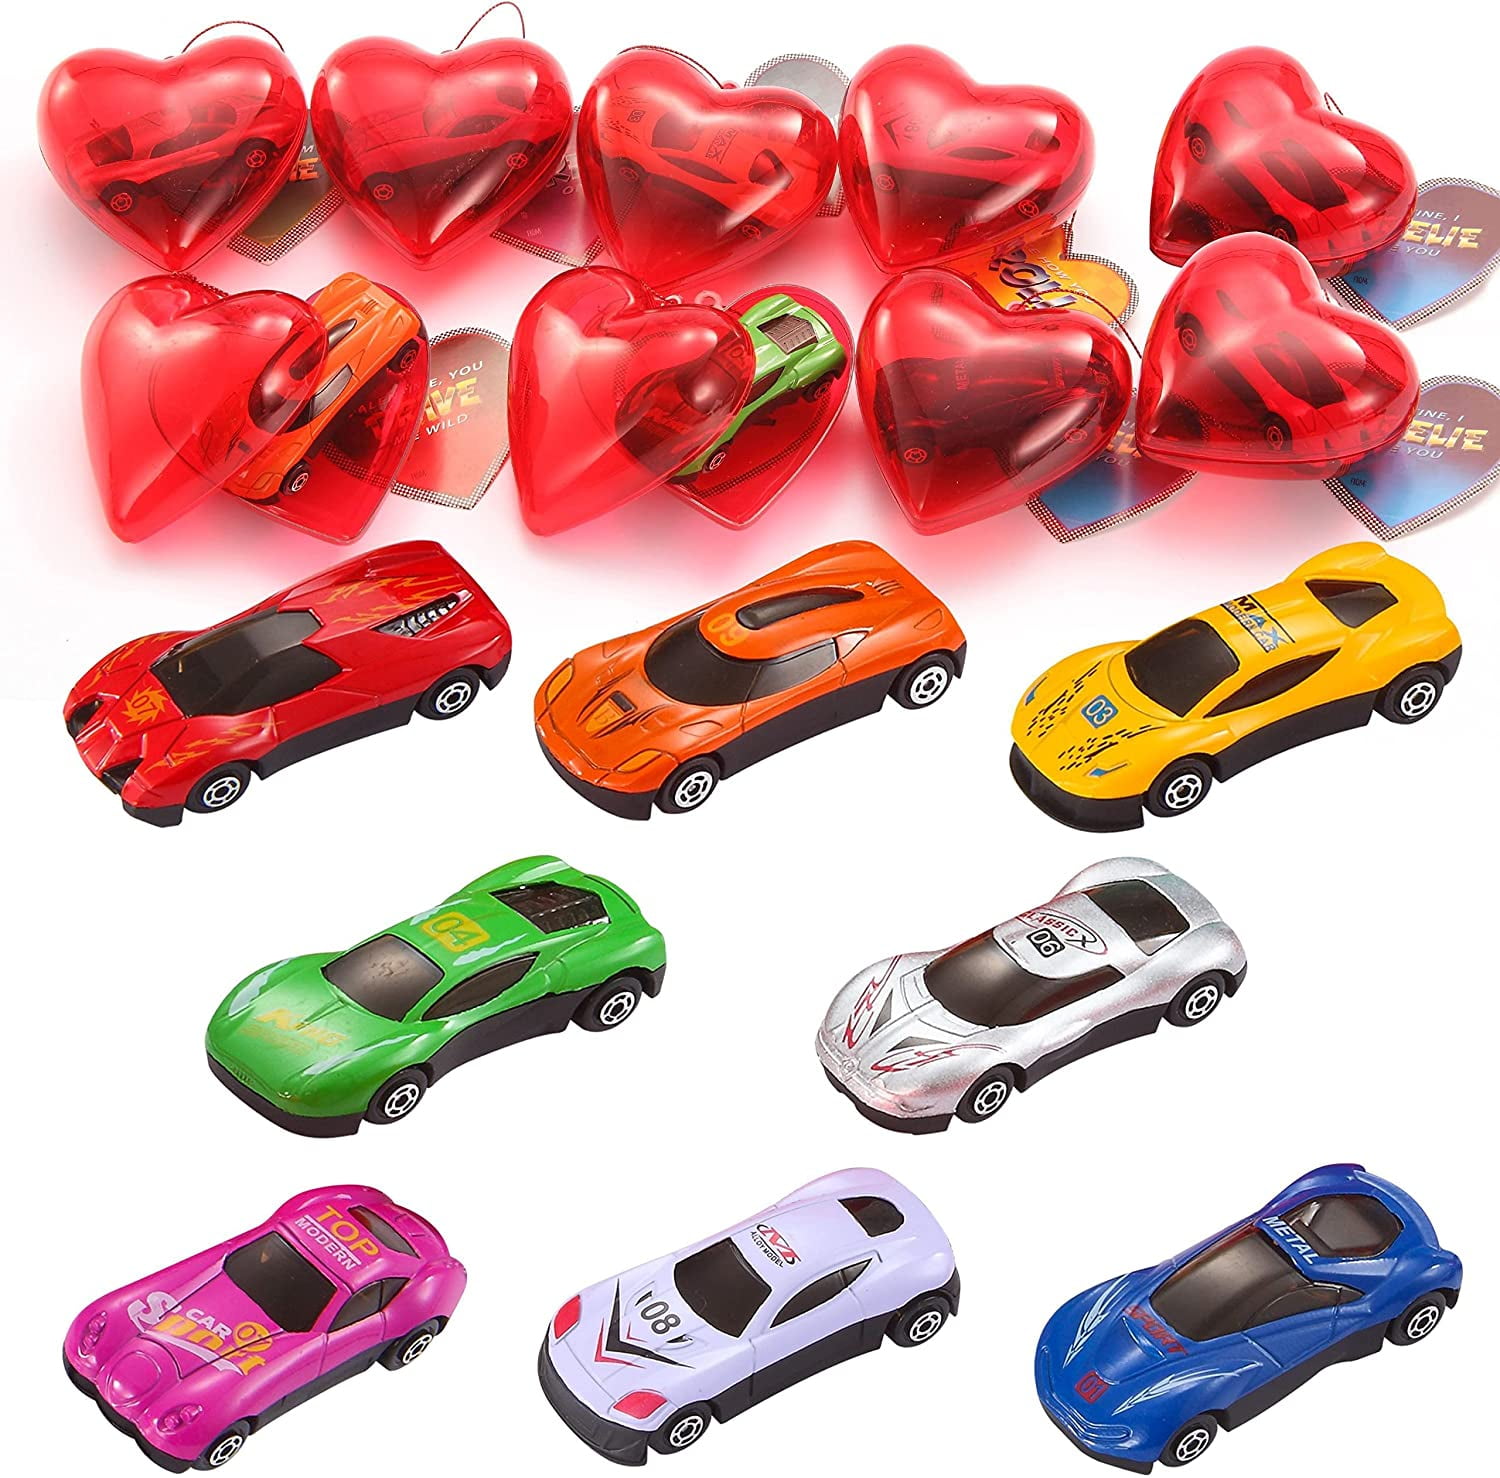 Vehicle Party Favor Toy Supplies. 28 Valentines Day Die-Cast Racing Cars Gift Cards for Kids with Valentine’s School Classroom Exchange Greeting Cards 